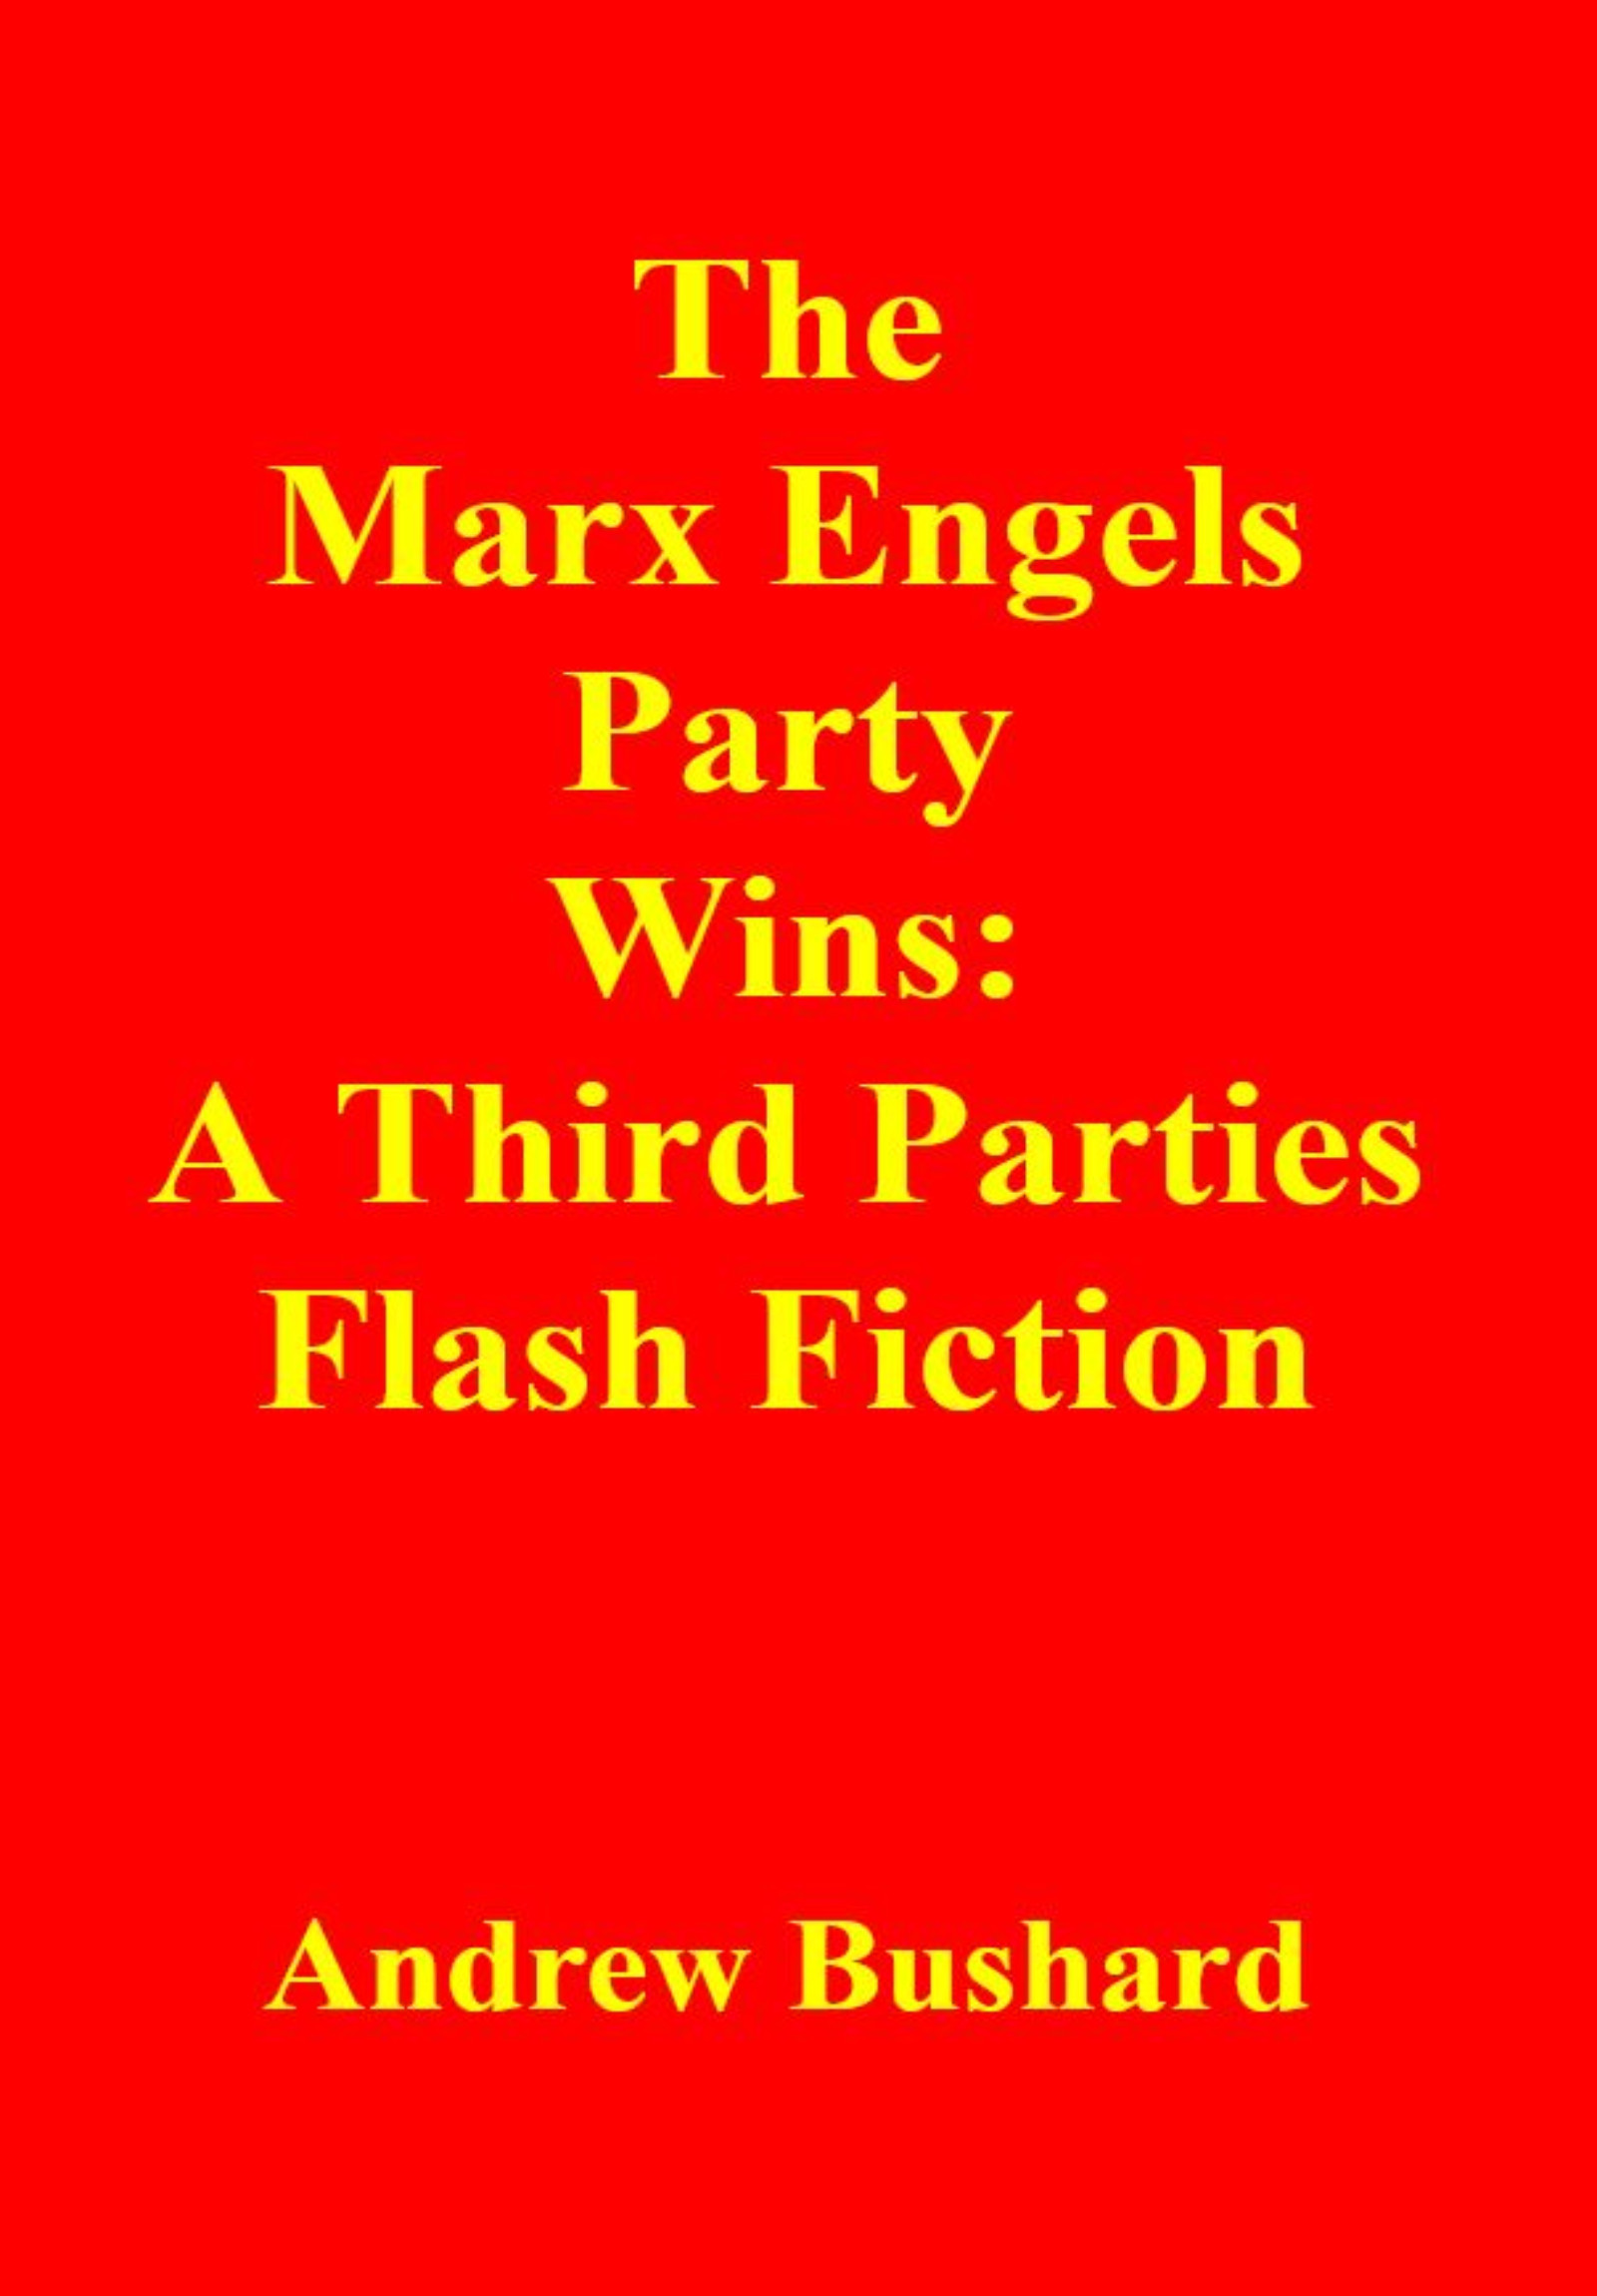 The Marx Engels Party Wins: A Third Parties Flash Fiction's featured image